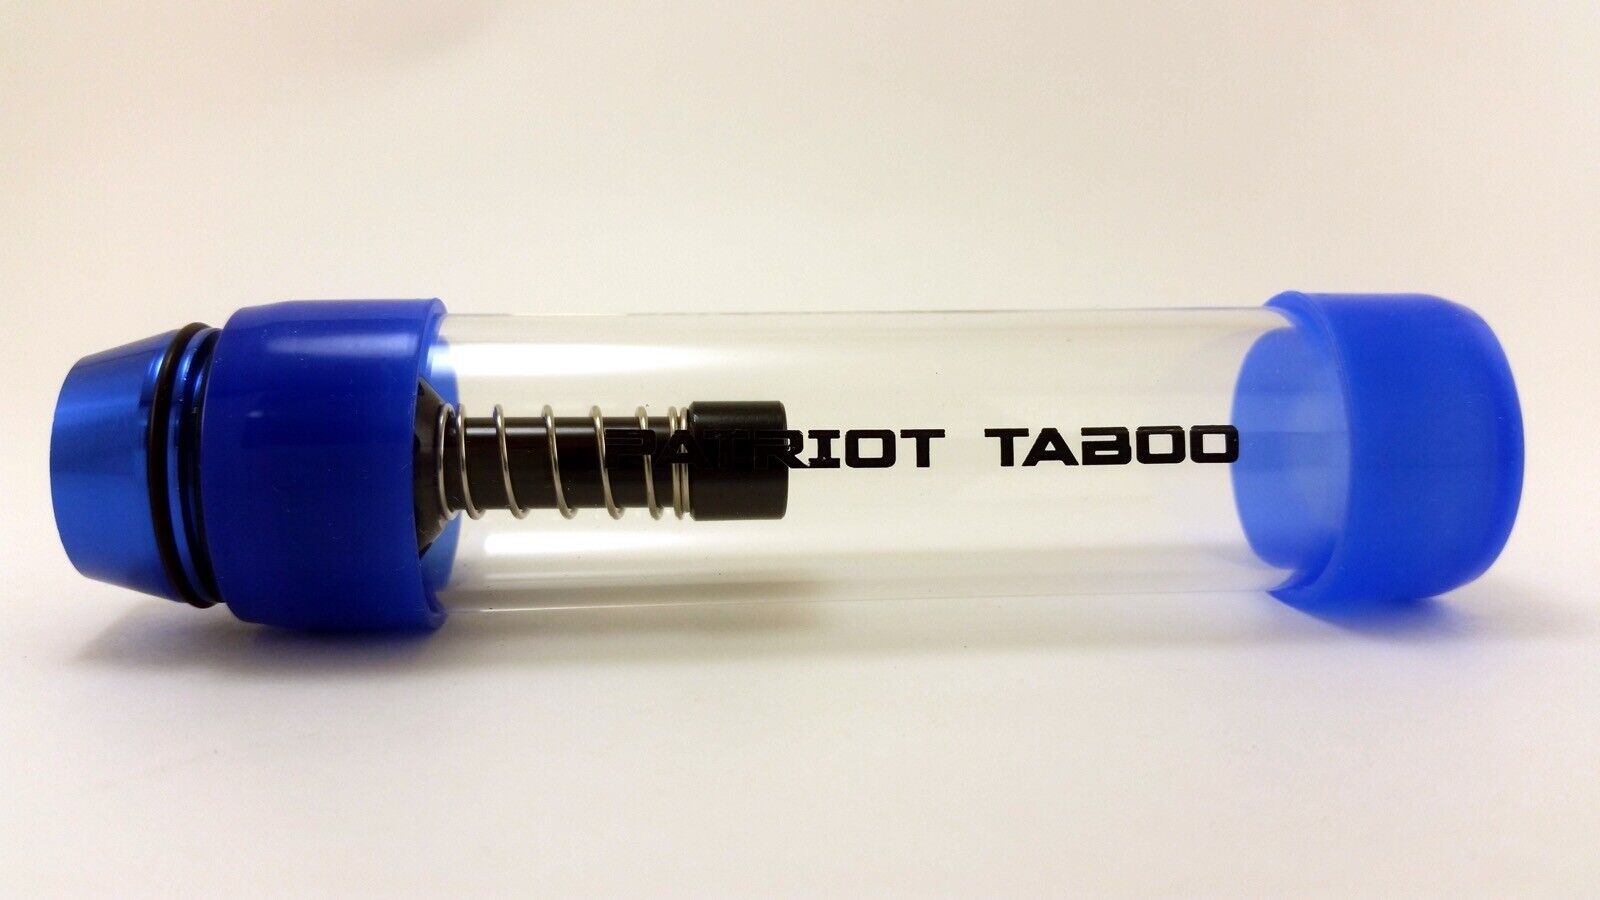 SUMMER SALE Patriot Taboo: Smoke-It BASIC - BLUE (Compare to Incredibowl)